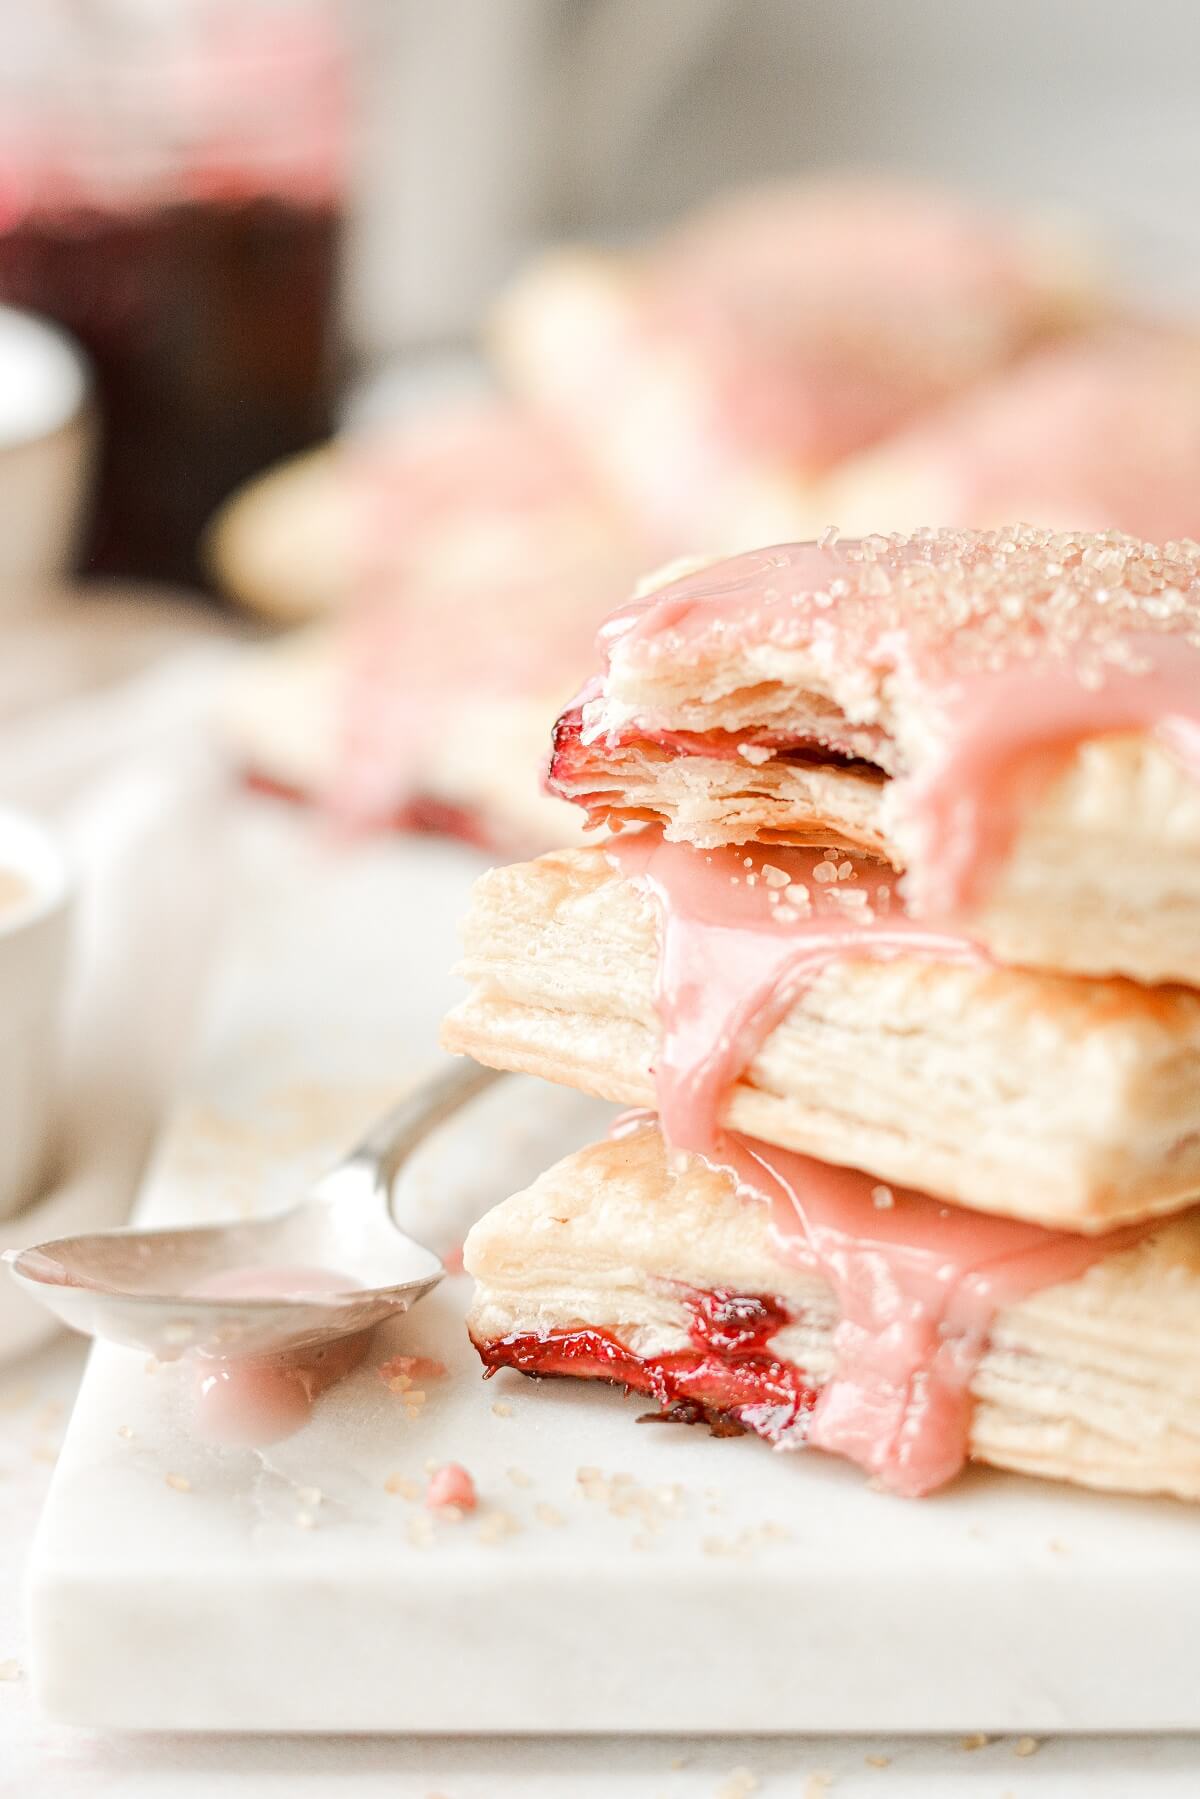 A stack of homemade cherry pop tarts, one with a bite taken.